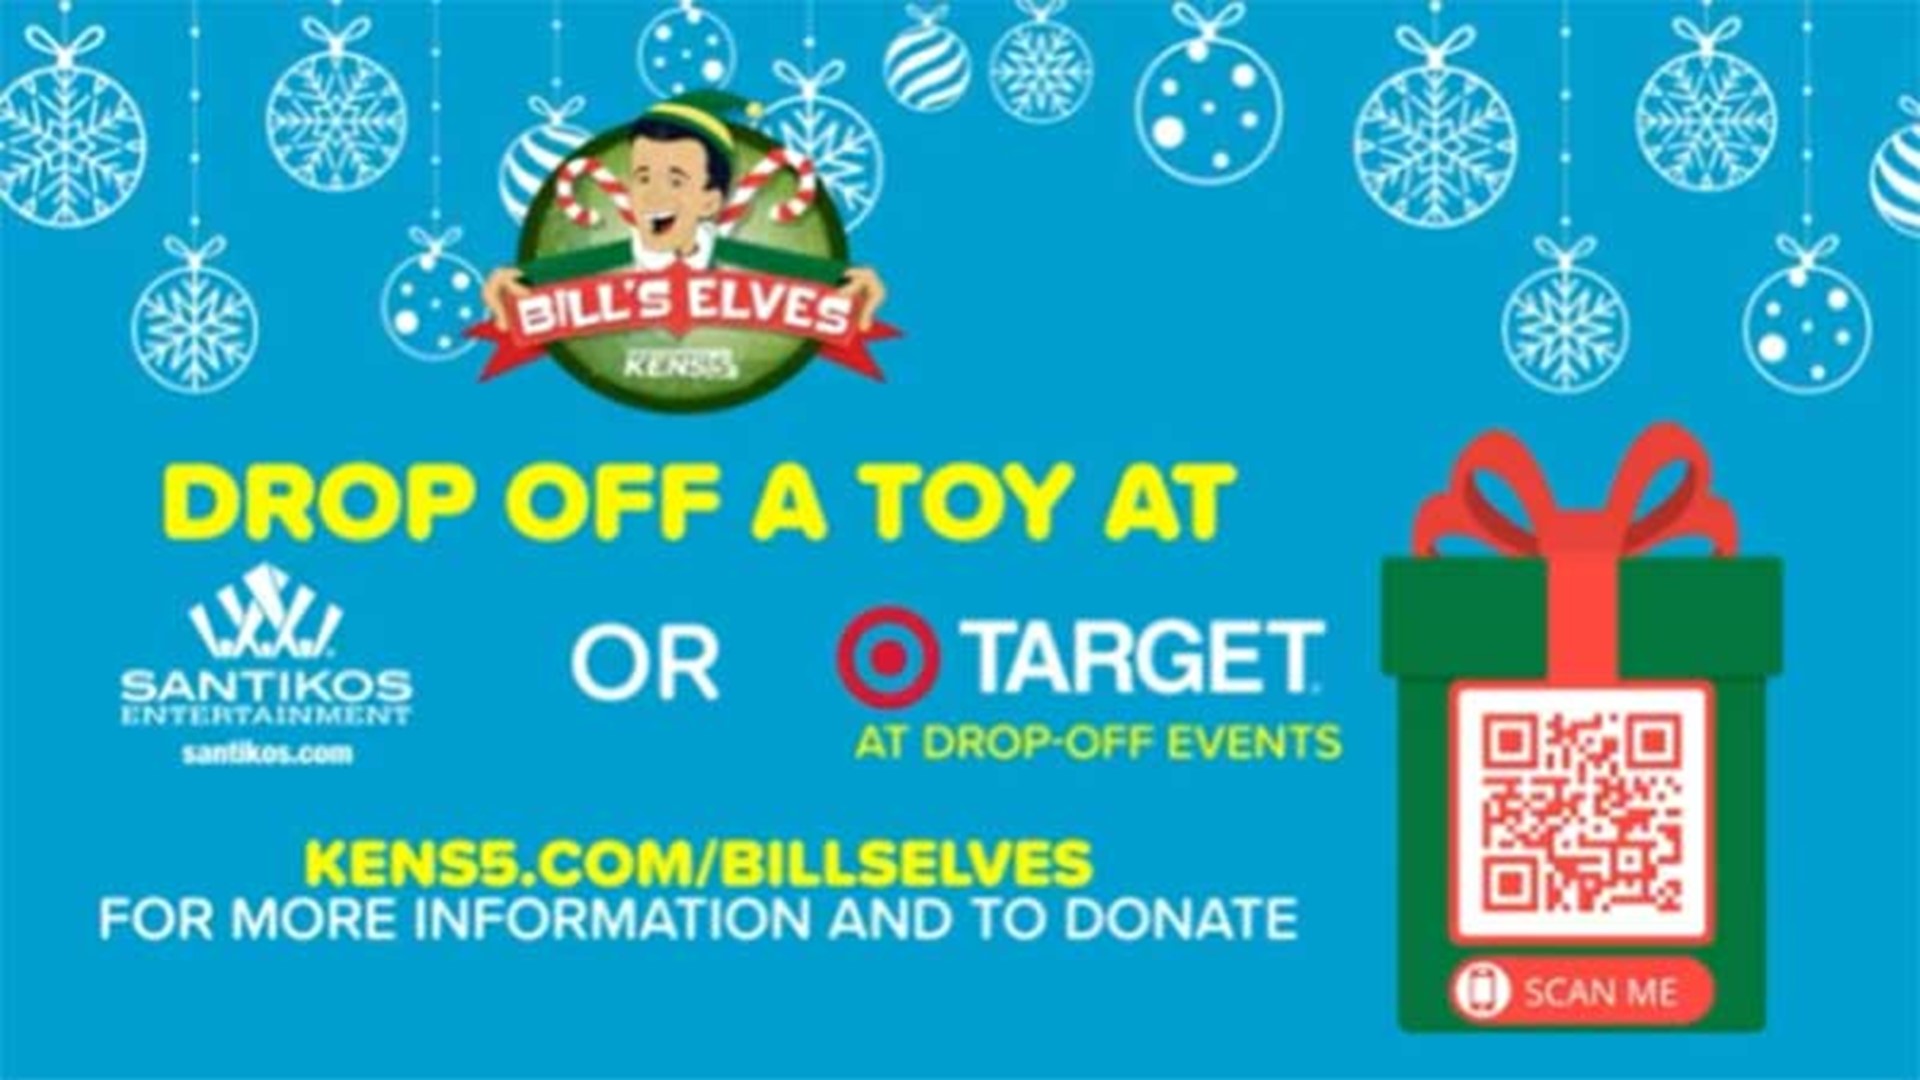 We need your help to make sure thousands of disadvantaged kids in the San Antonio area get a Christmas toy this year!